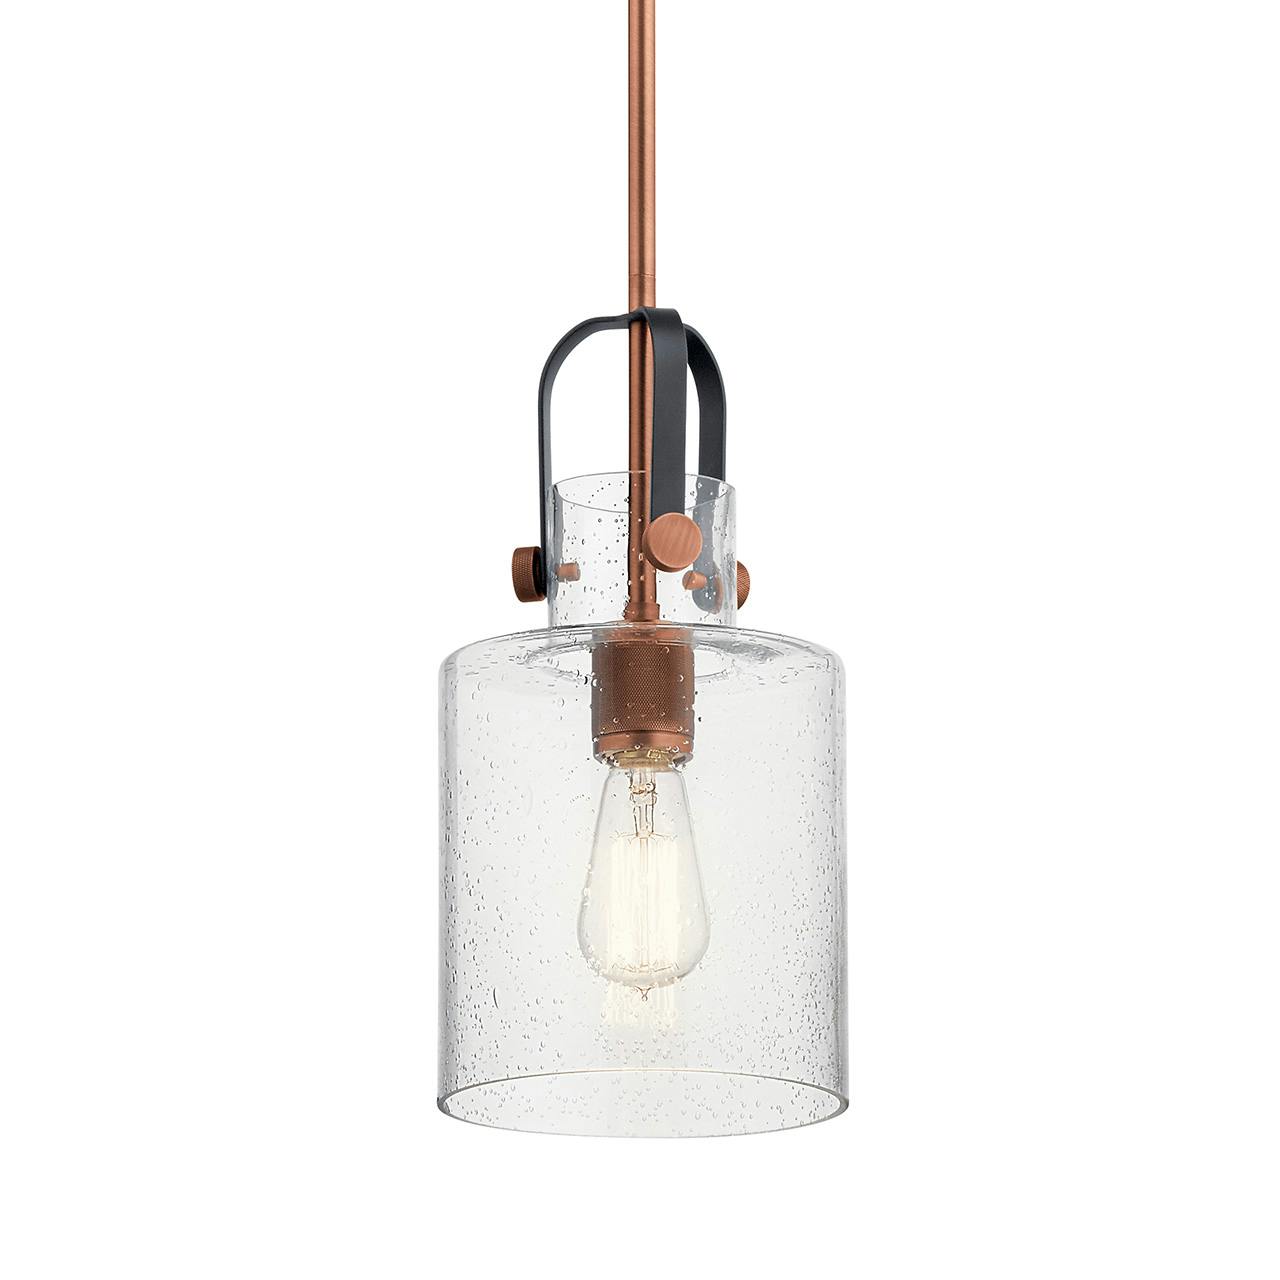 Kitner 1 Light Pendant Black and Copper without the canopy on a white background